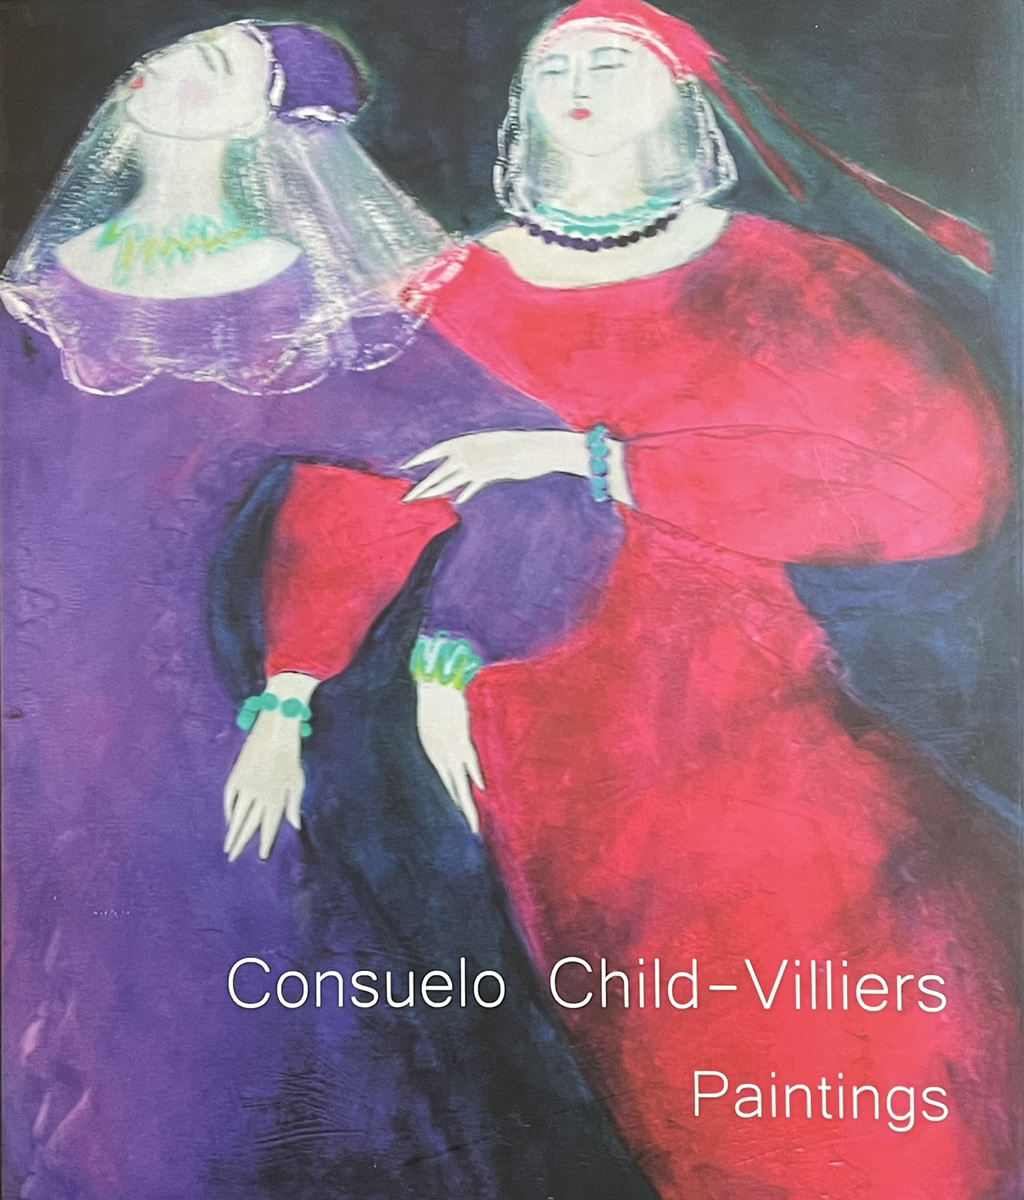 Paintings by Consuelo Child-Villiers